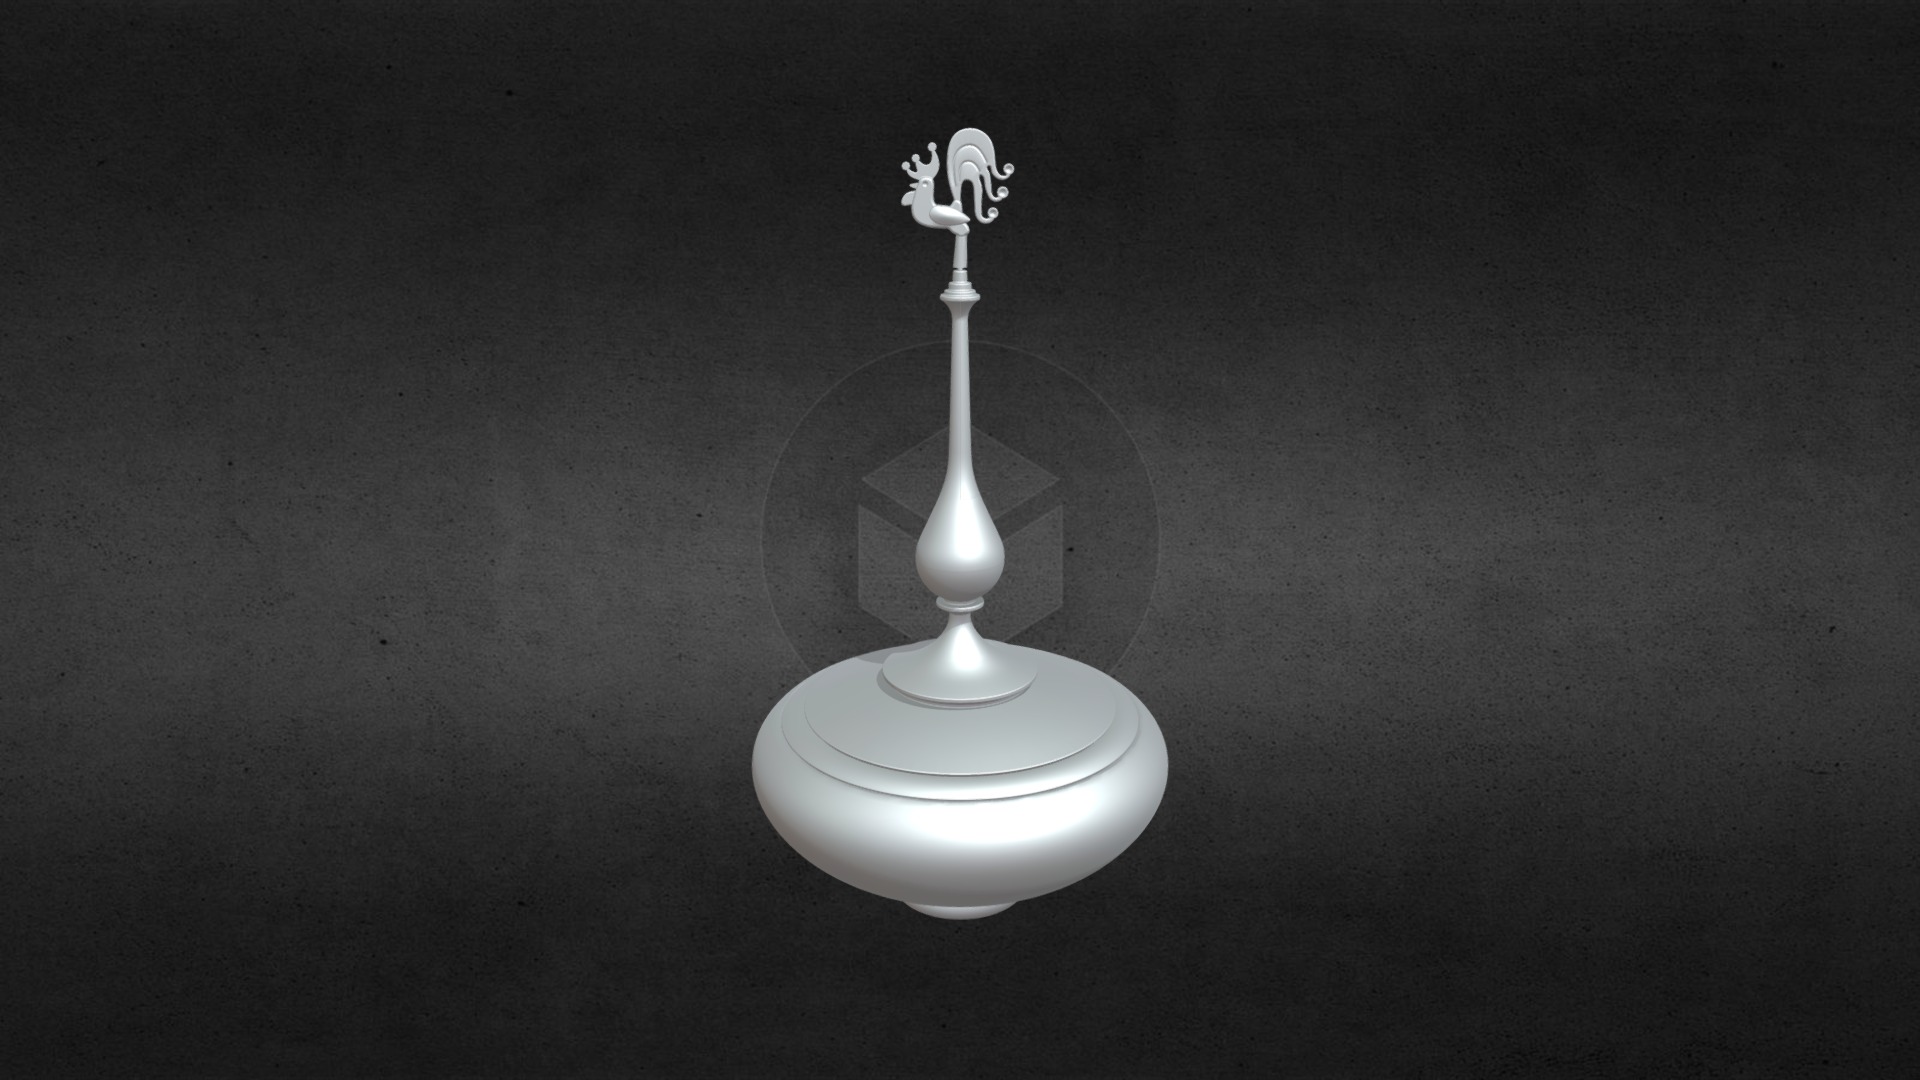 3D model Jewelry Box 1 - This is a 3D model of the Jewelry Box 1. The 3D model is about a light bulb on a table.